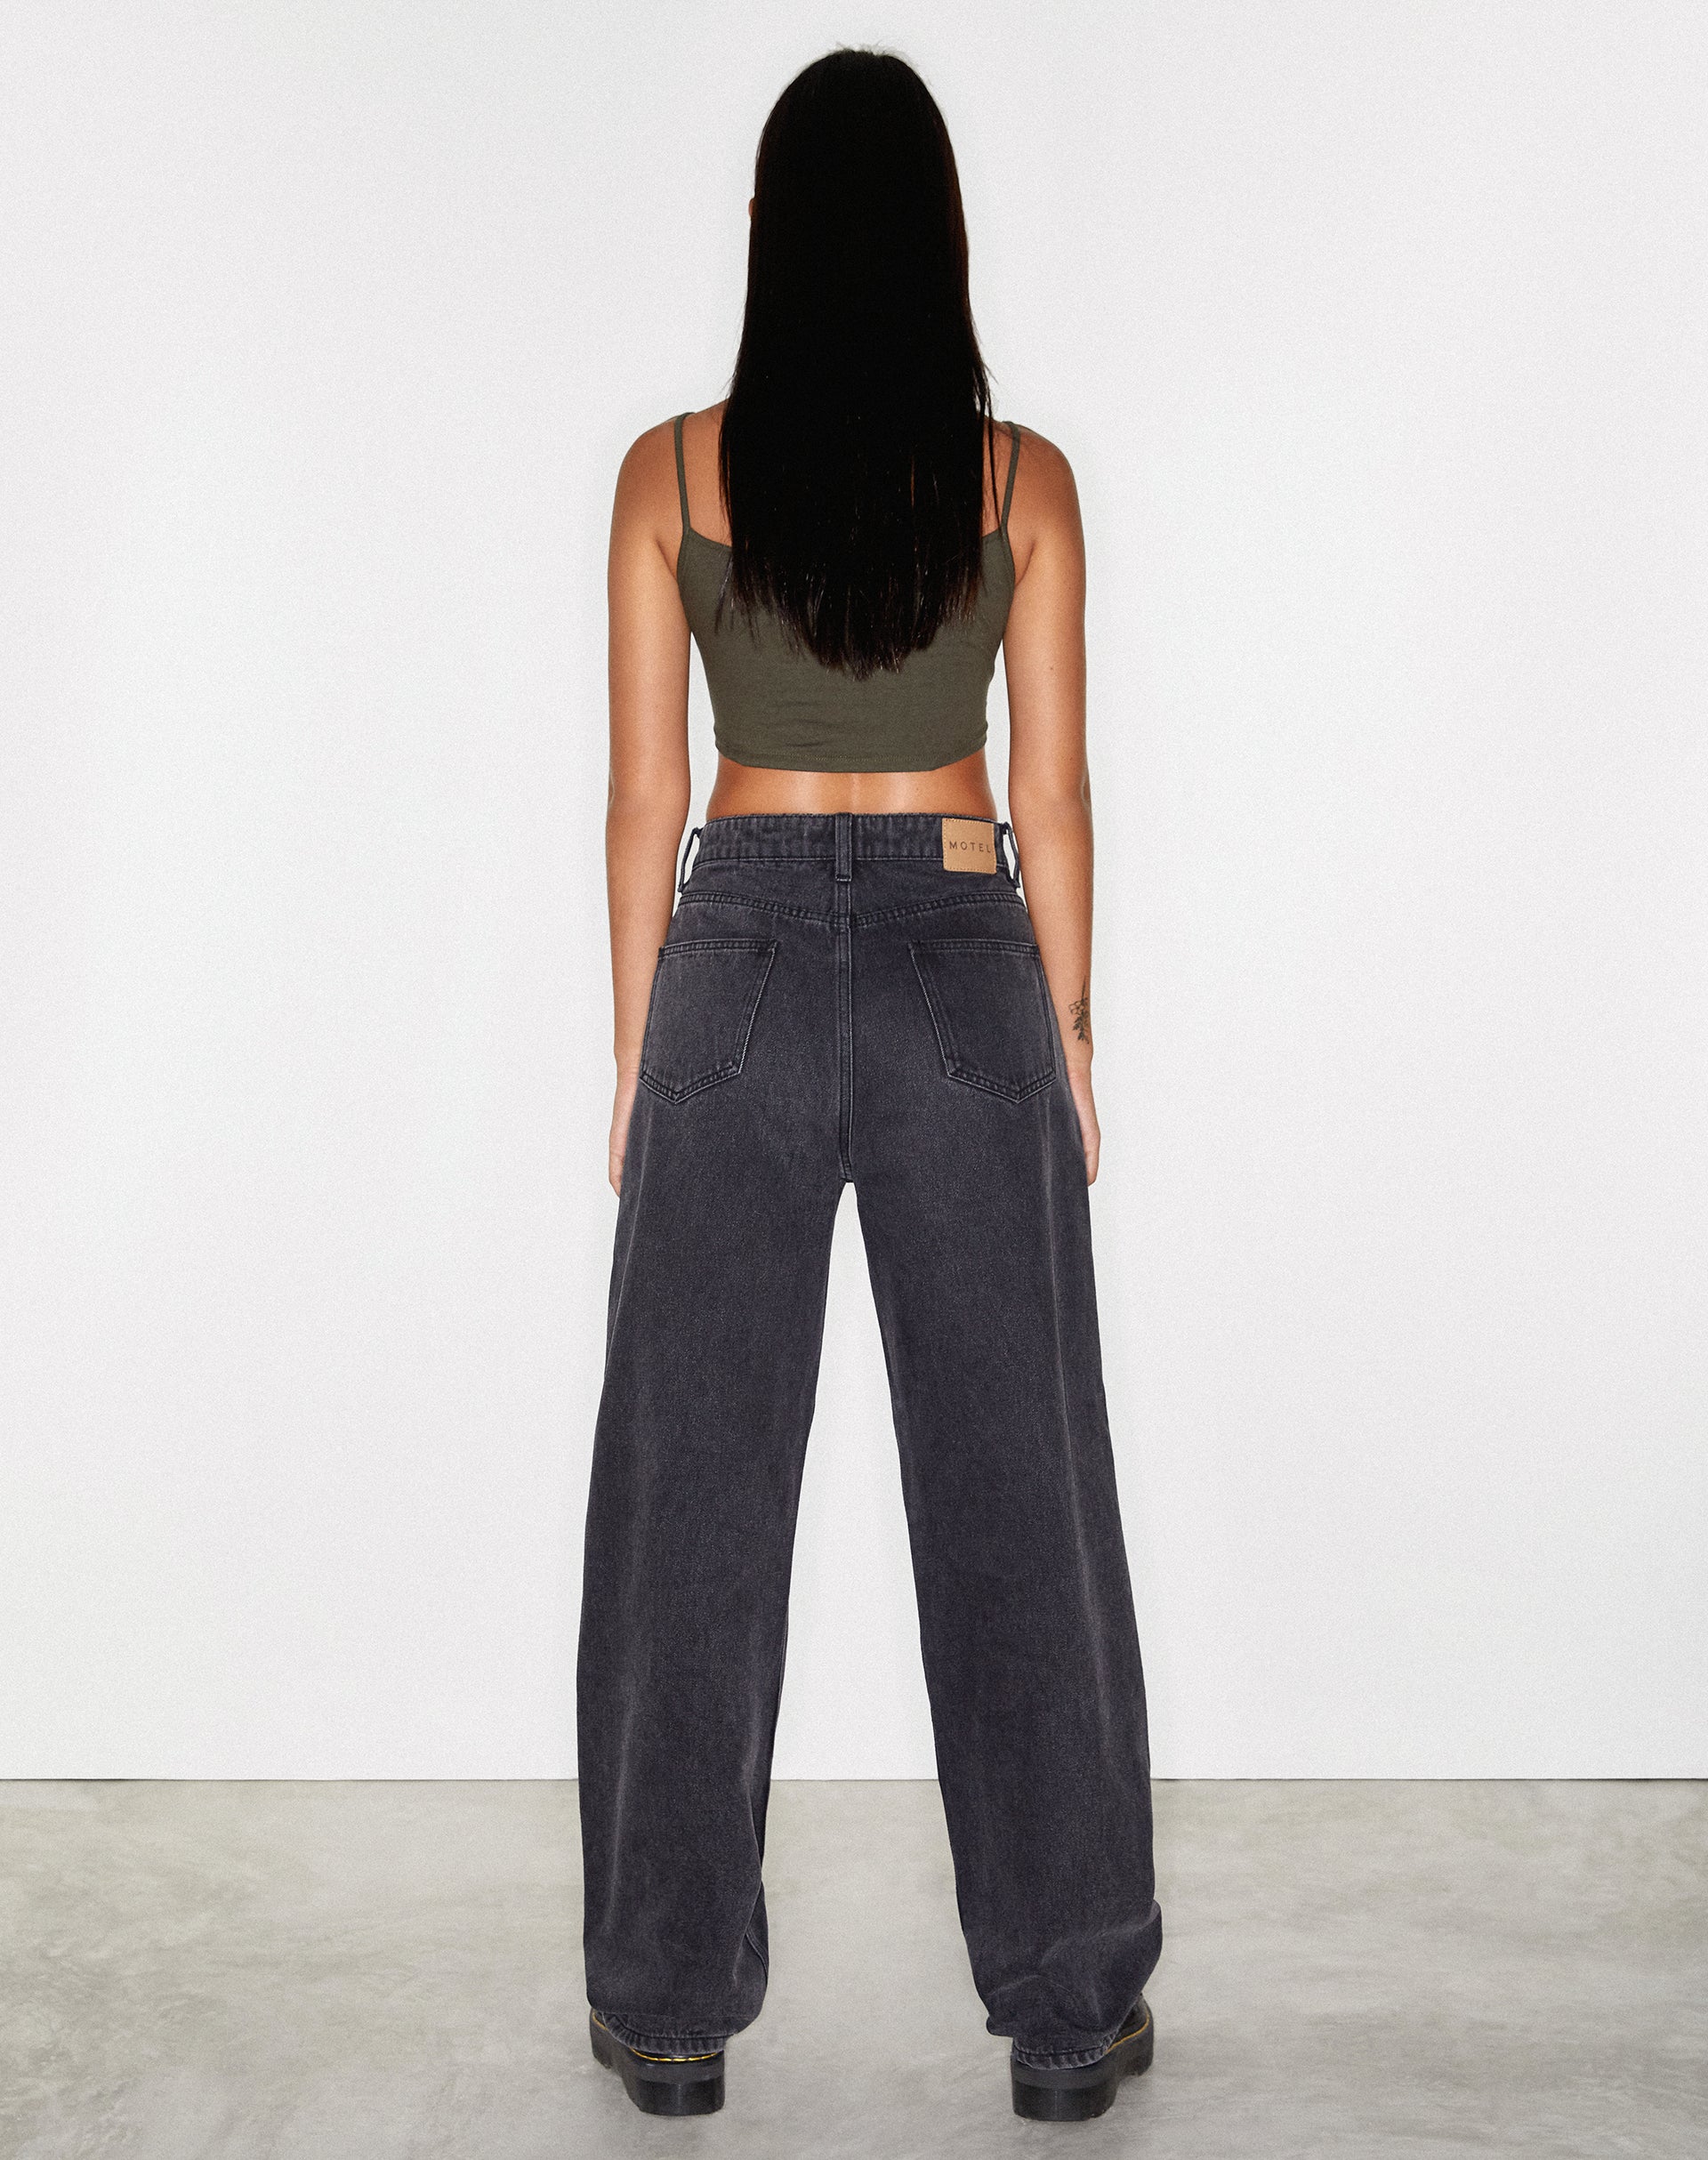 Image of Rips Parallel Jeans in Black Wash